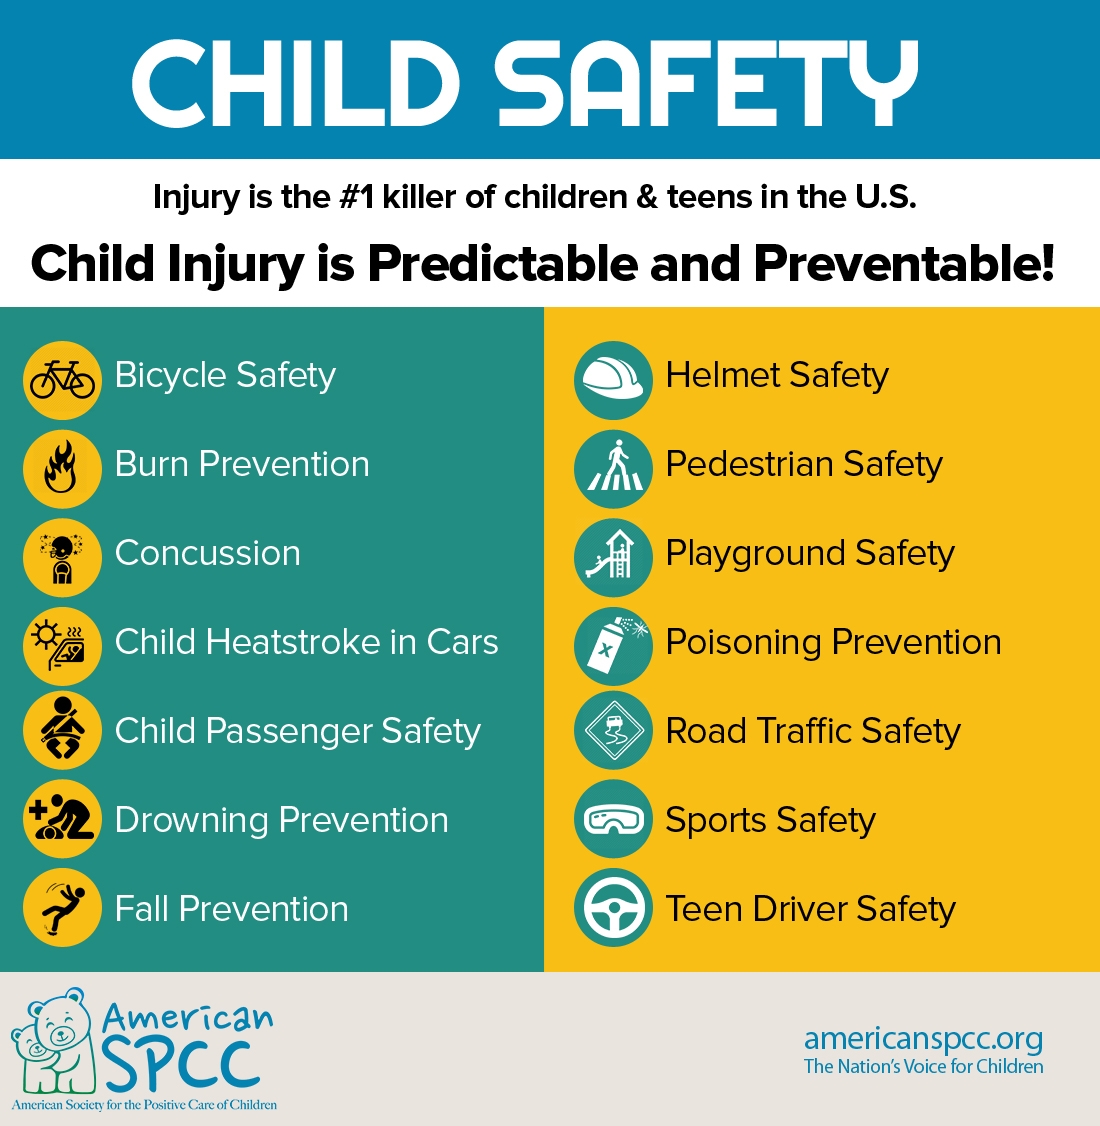 Child-Safety-American-SPCC-The-Nation's-Voice-fro-Children